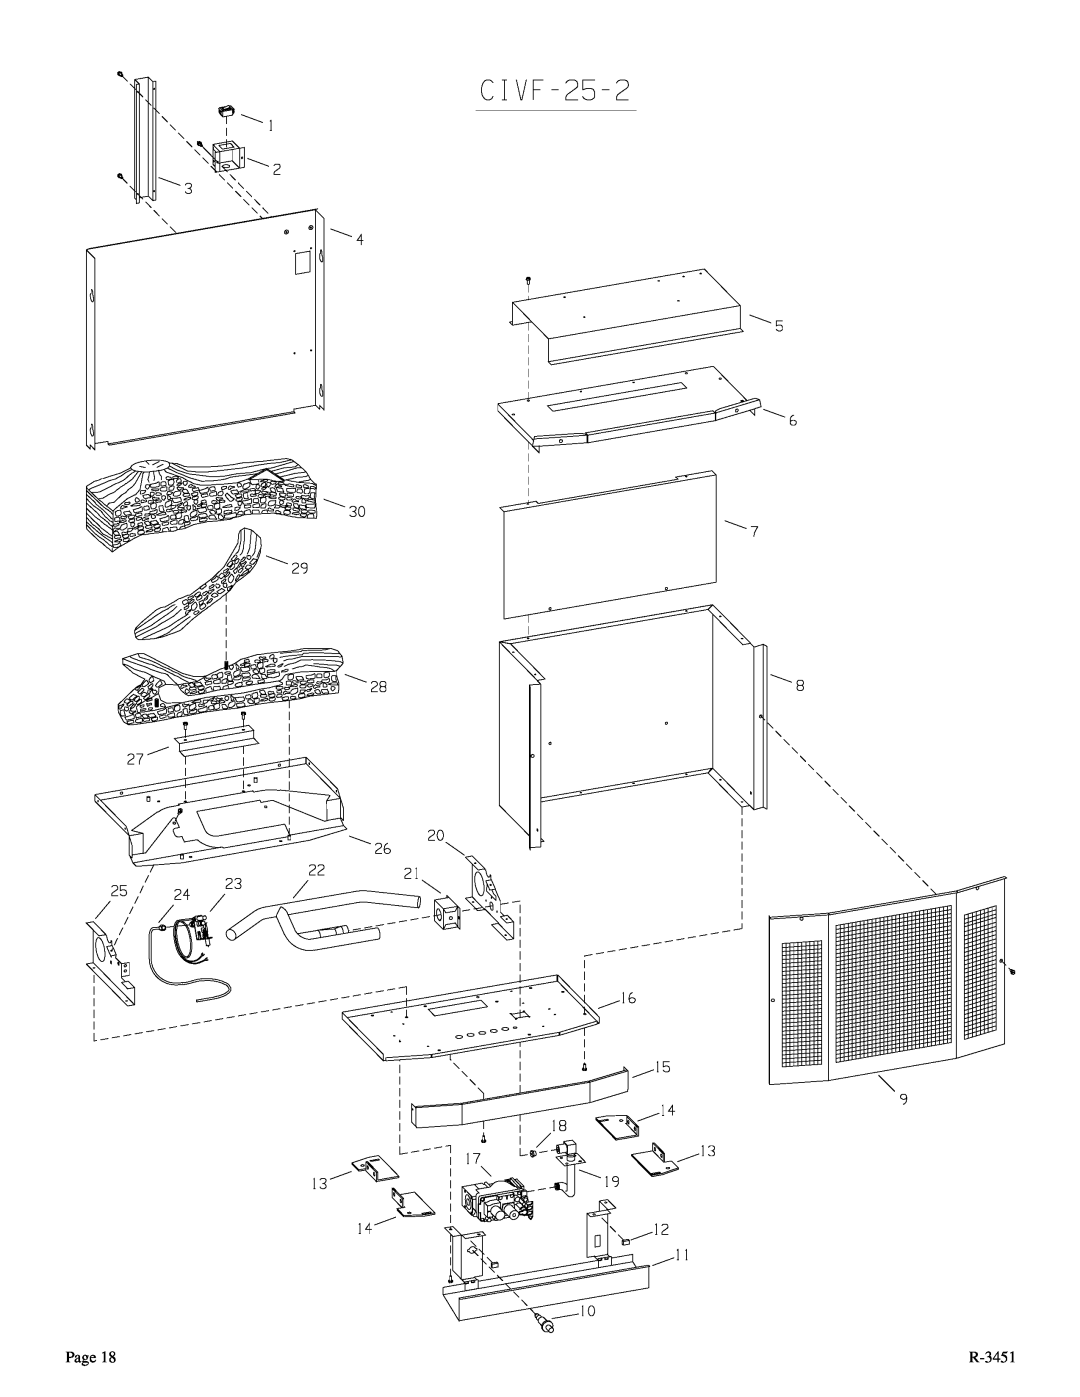 Empire Comfort Systems CIVF-25-2 installation instructions Page, R-3451 